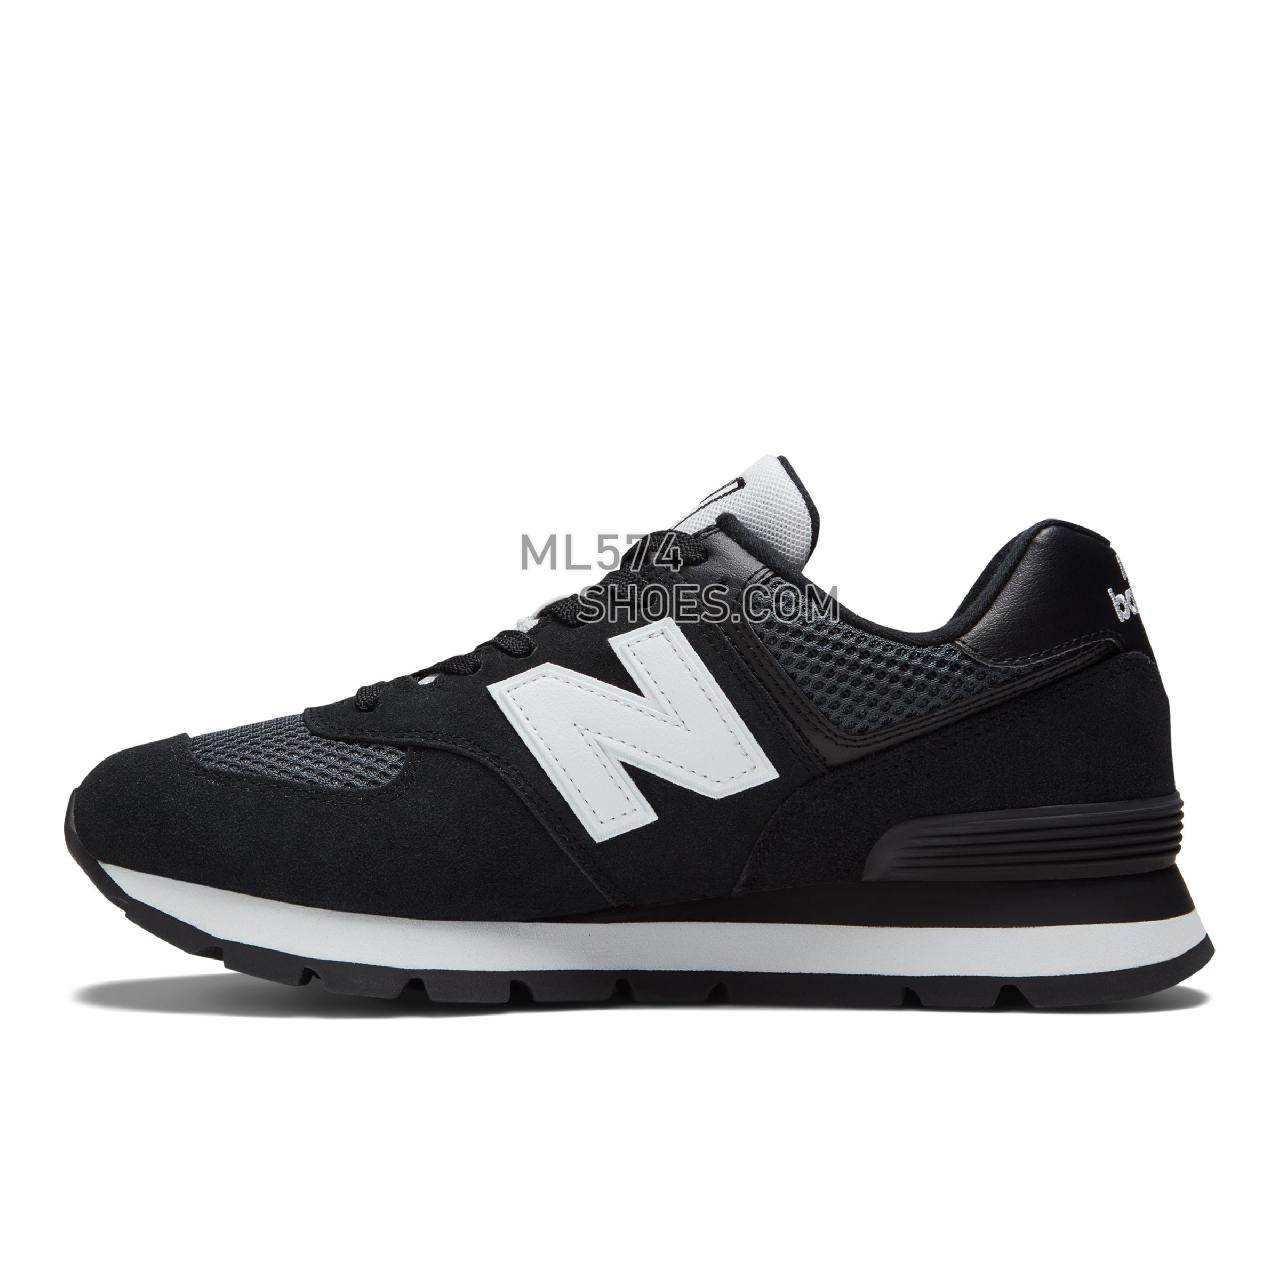 New Balance 574 Rugged - Men's Classic Sneakers - Black with White - ML574DGO